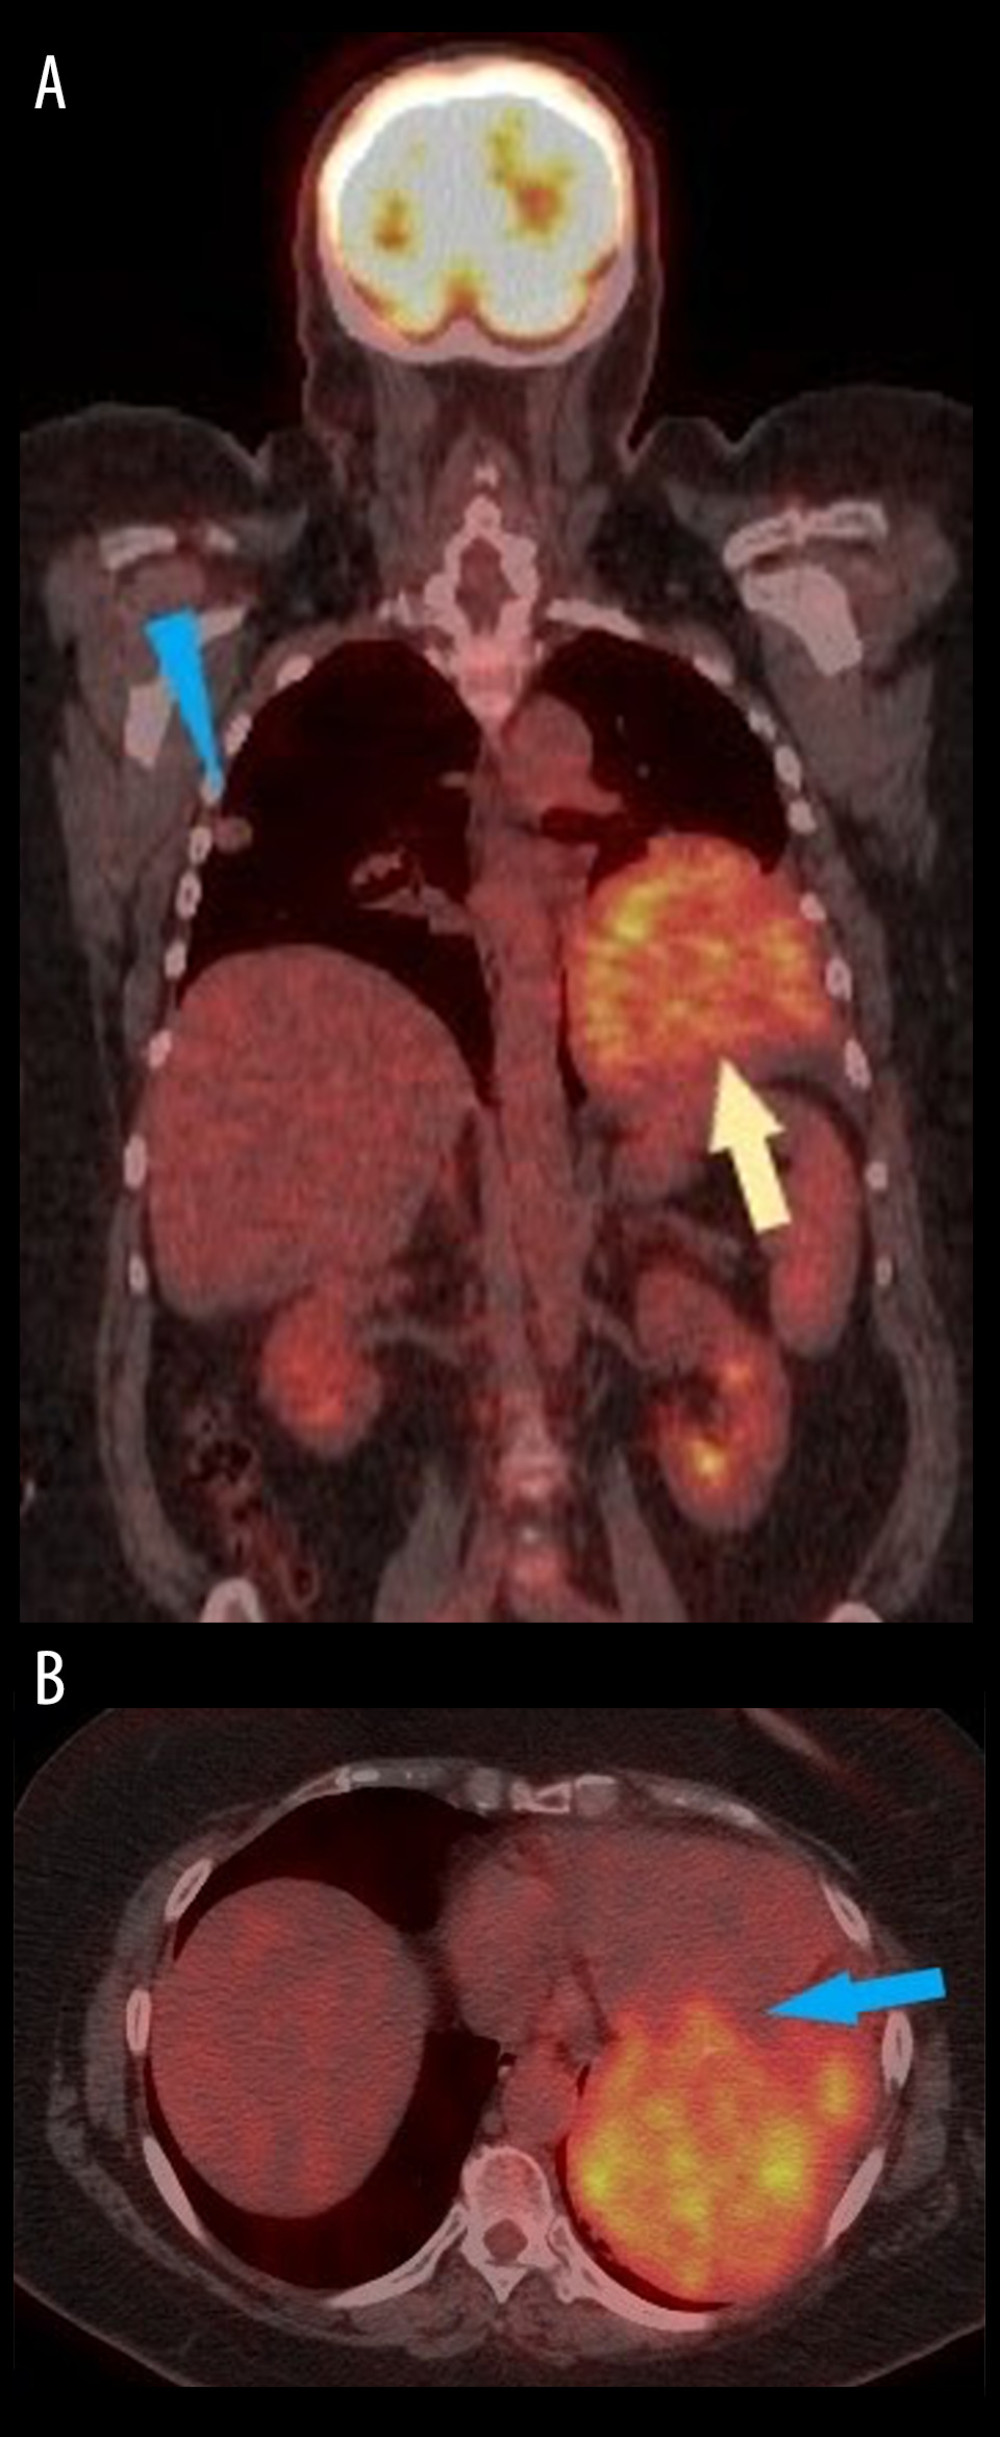 (A) Fused coronal PET/CT shows the large hypermetabolic left chest mass (light yellow arrow) as well as a contralateral metastatic pulmonary nodule (blue triangle). (B) Although the heart is typically hypermetabolic on PET, there is suspicion of invasion of the left basilar ventricle on axial fused PET/CT imaging (blue arrow).